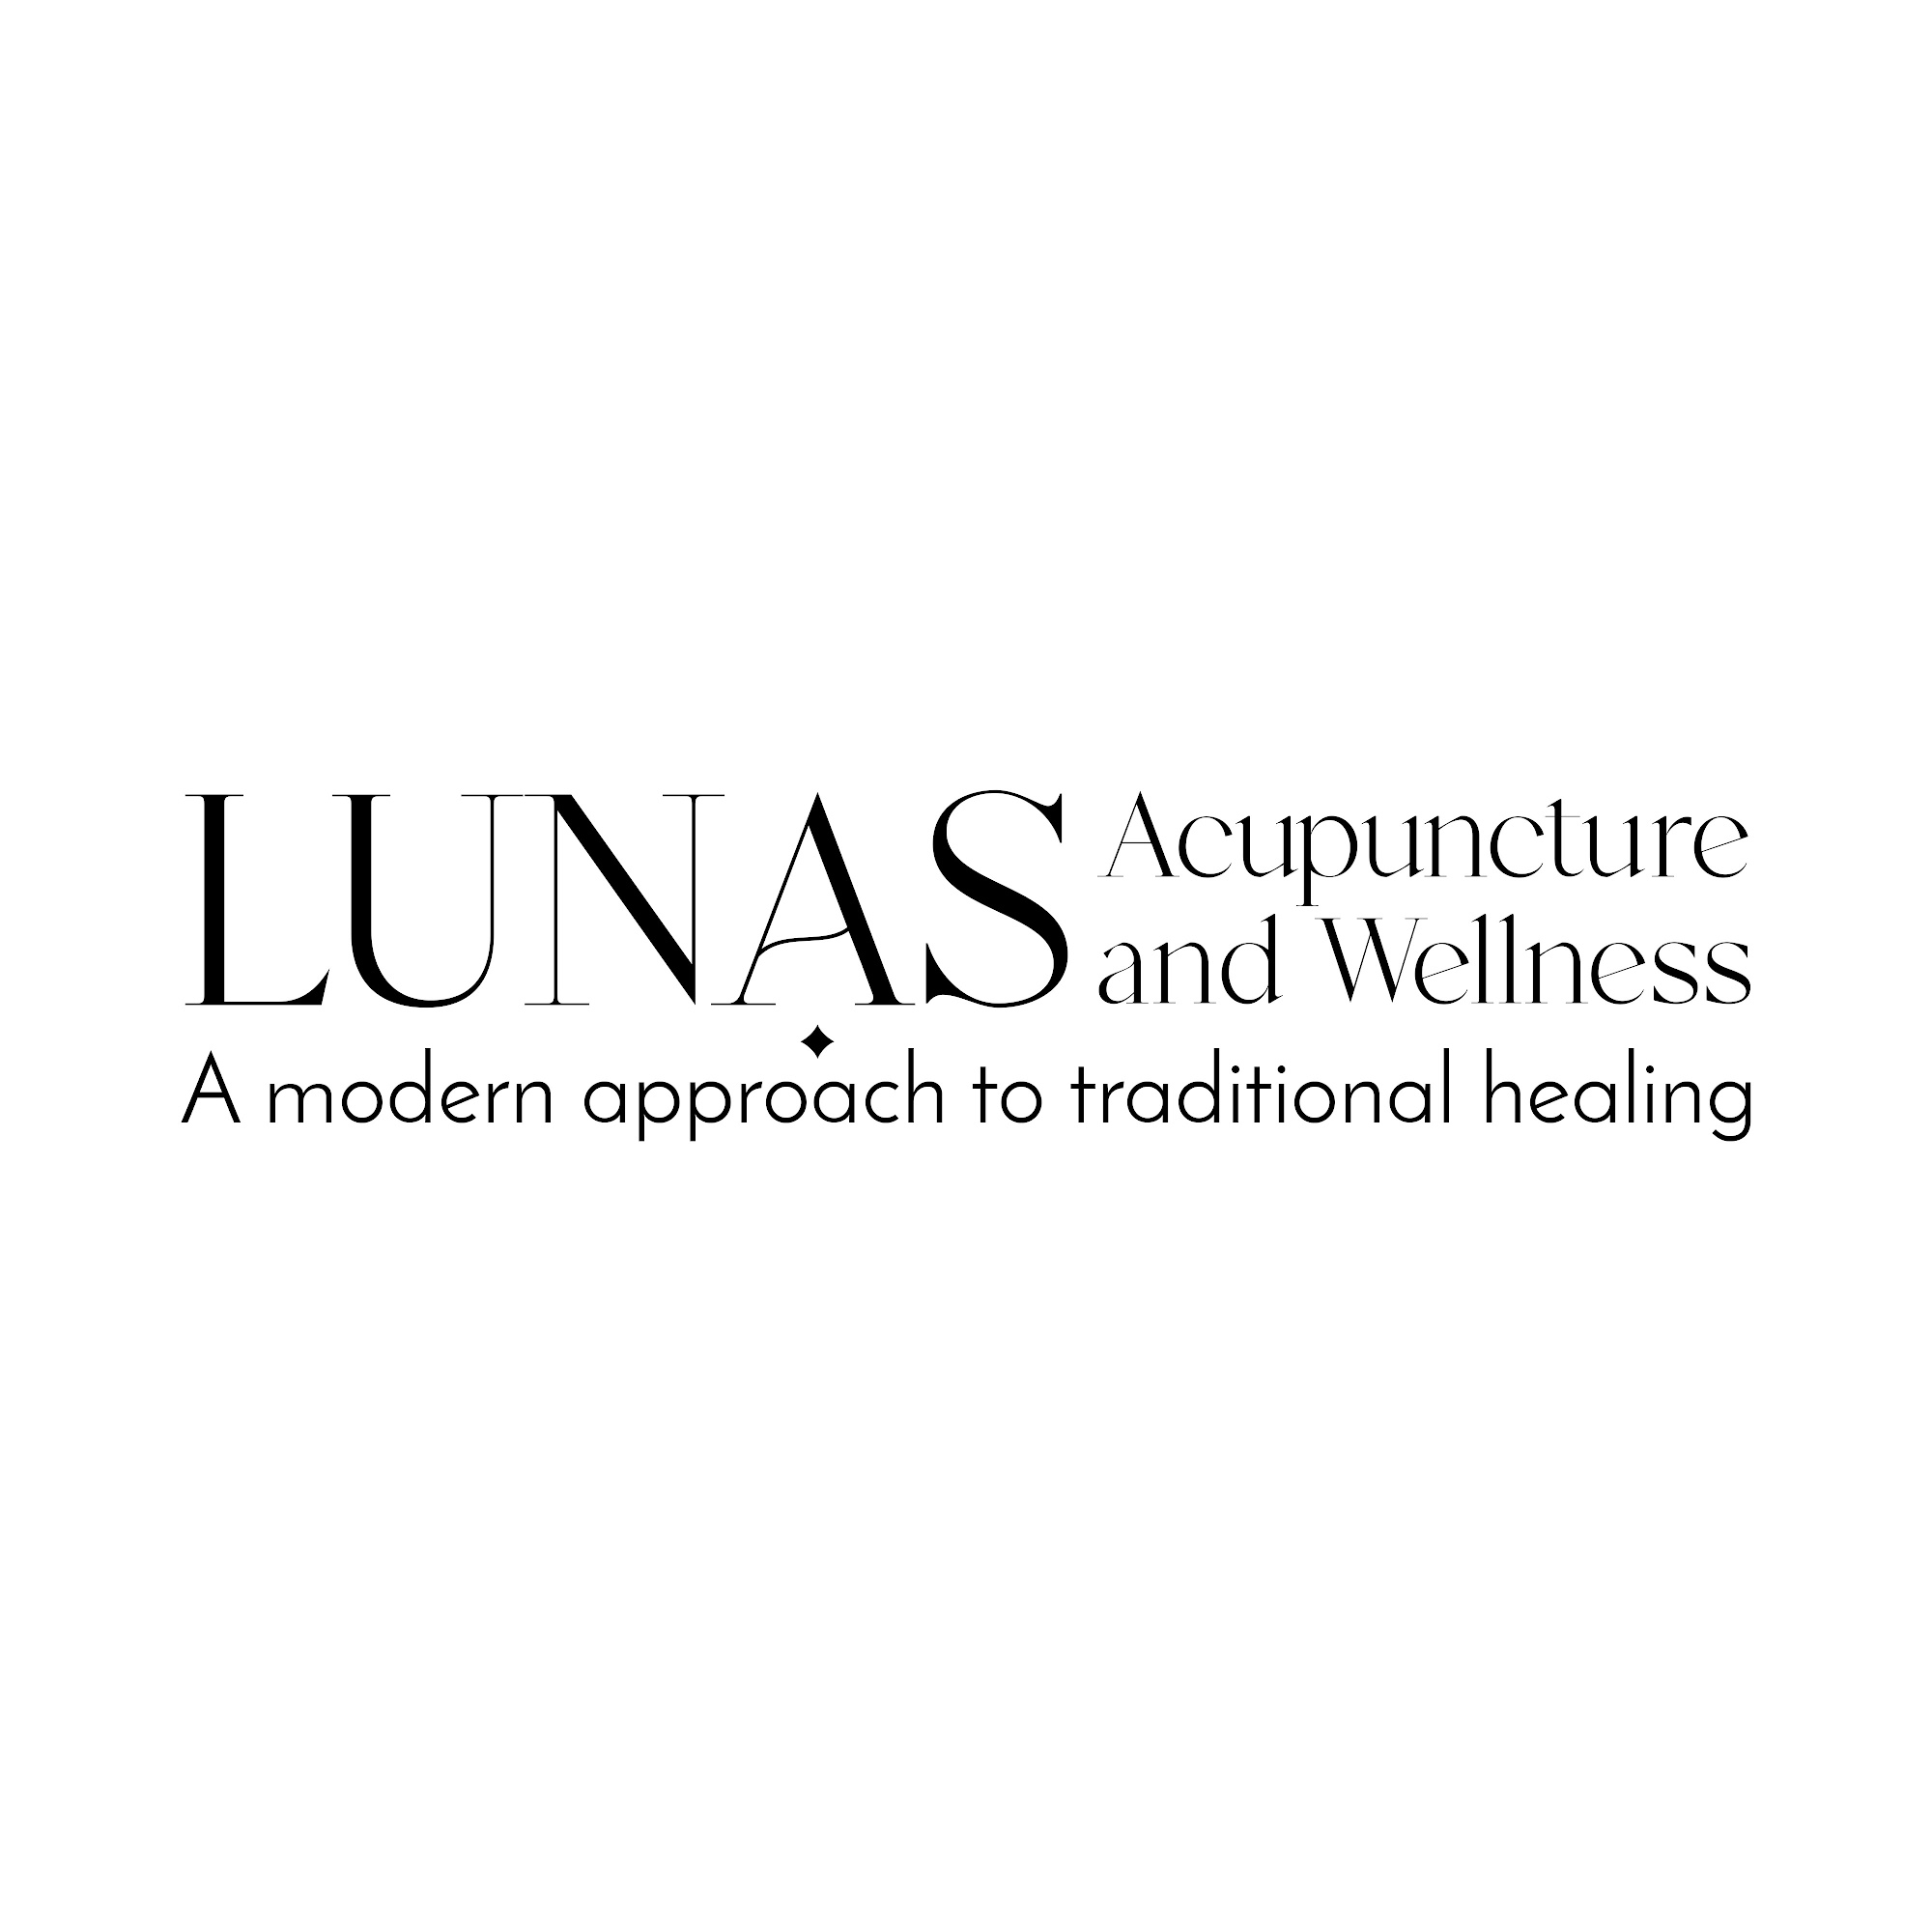 Lunas Acupuncture and Wellness 208 3rd Ave N, Wauchula Florida 33873